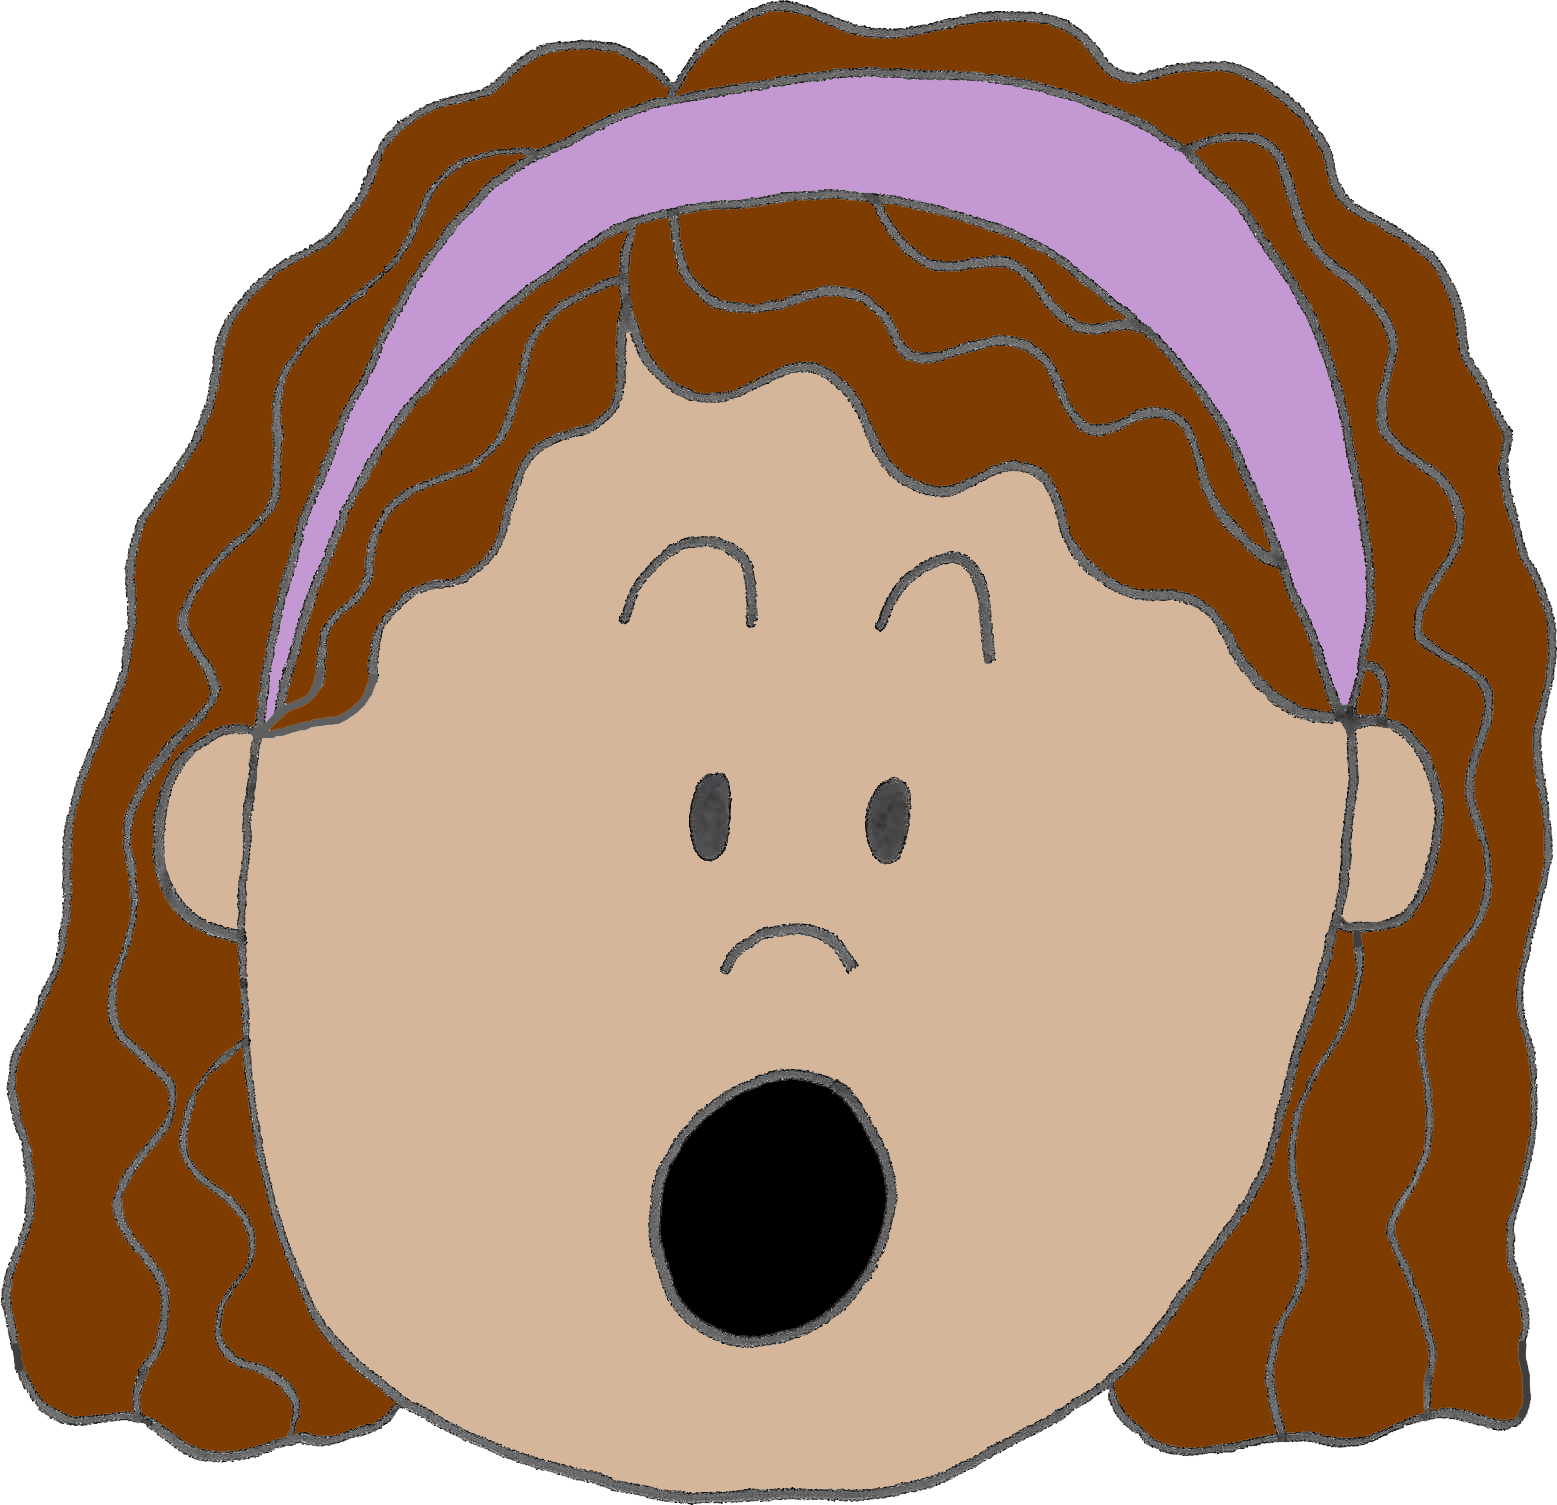 Surprised - Surprised clipart image can be... 